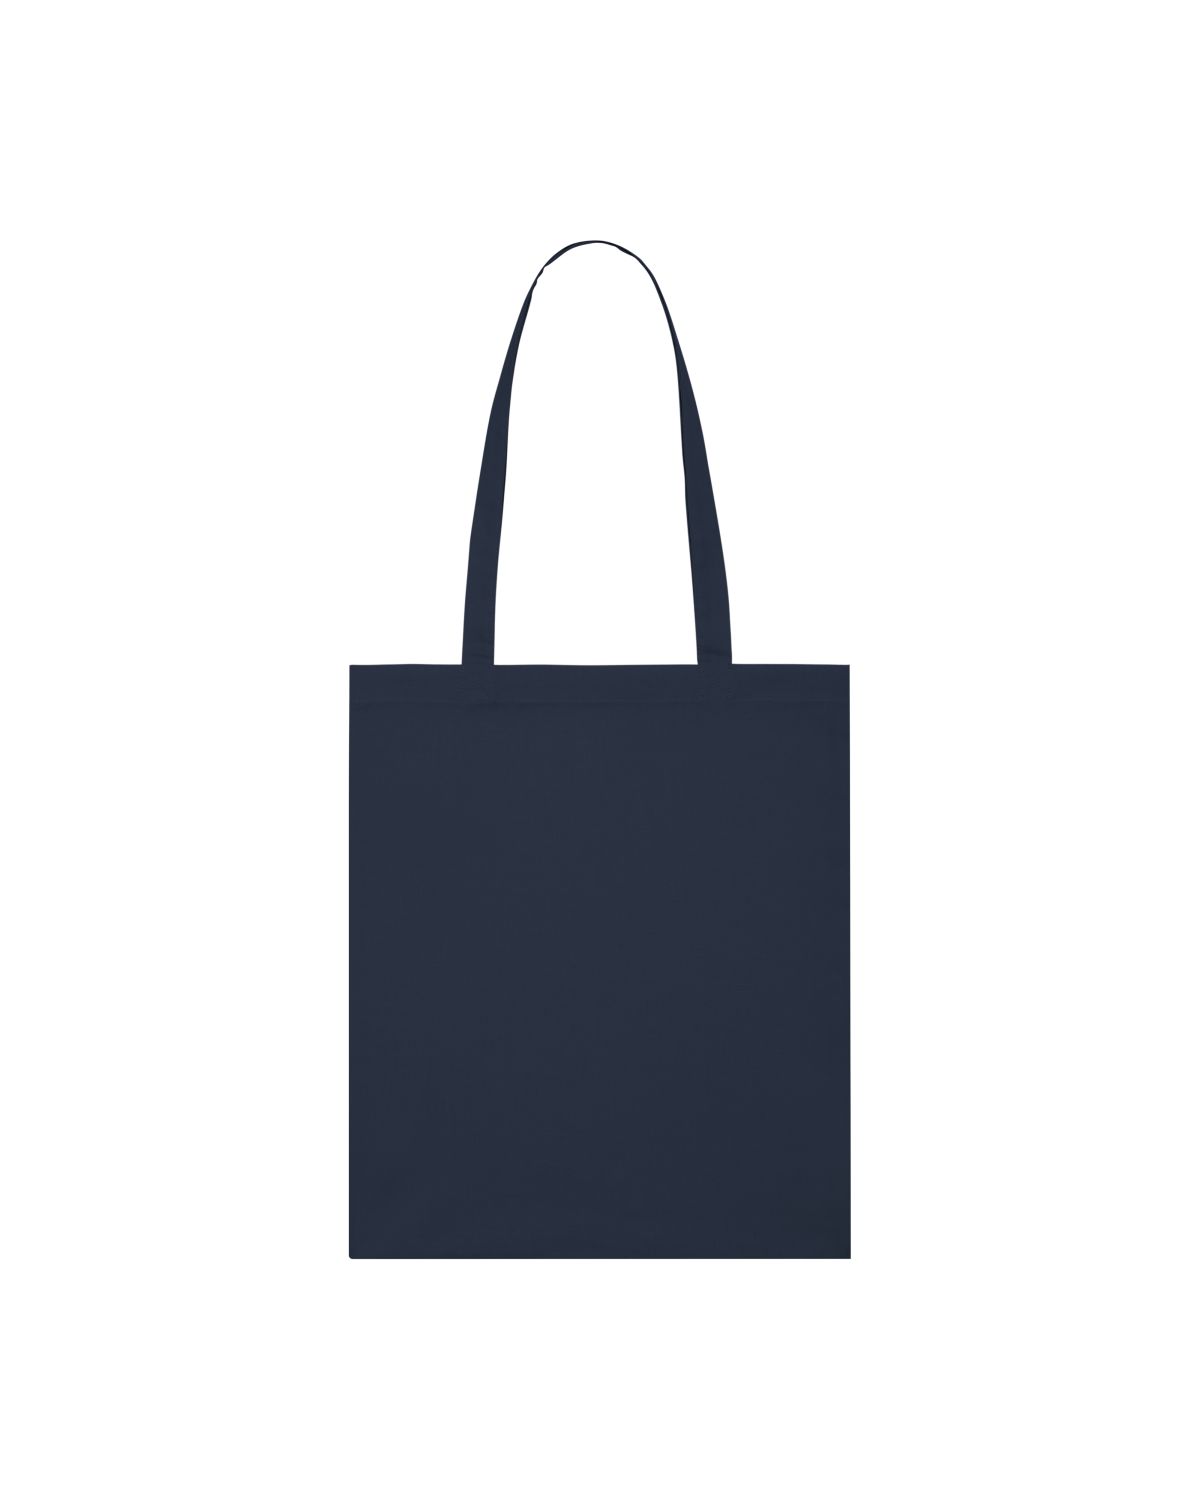 Customize your own sustainable tote bag made of 100% GOTS-certified organic cotton.